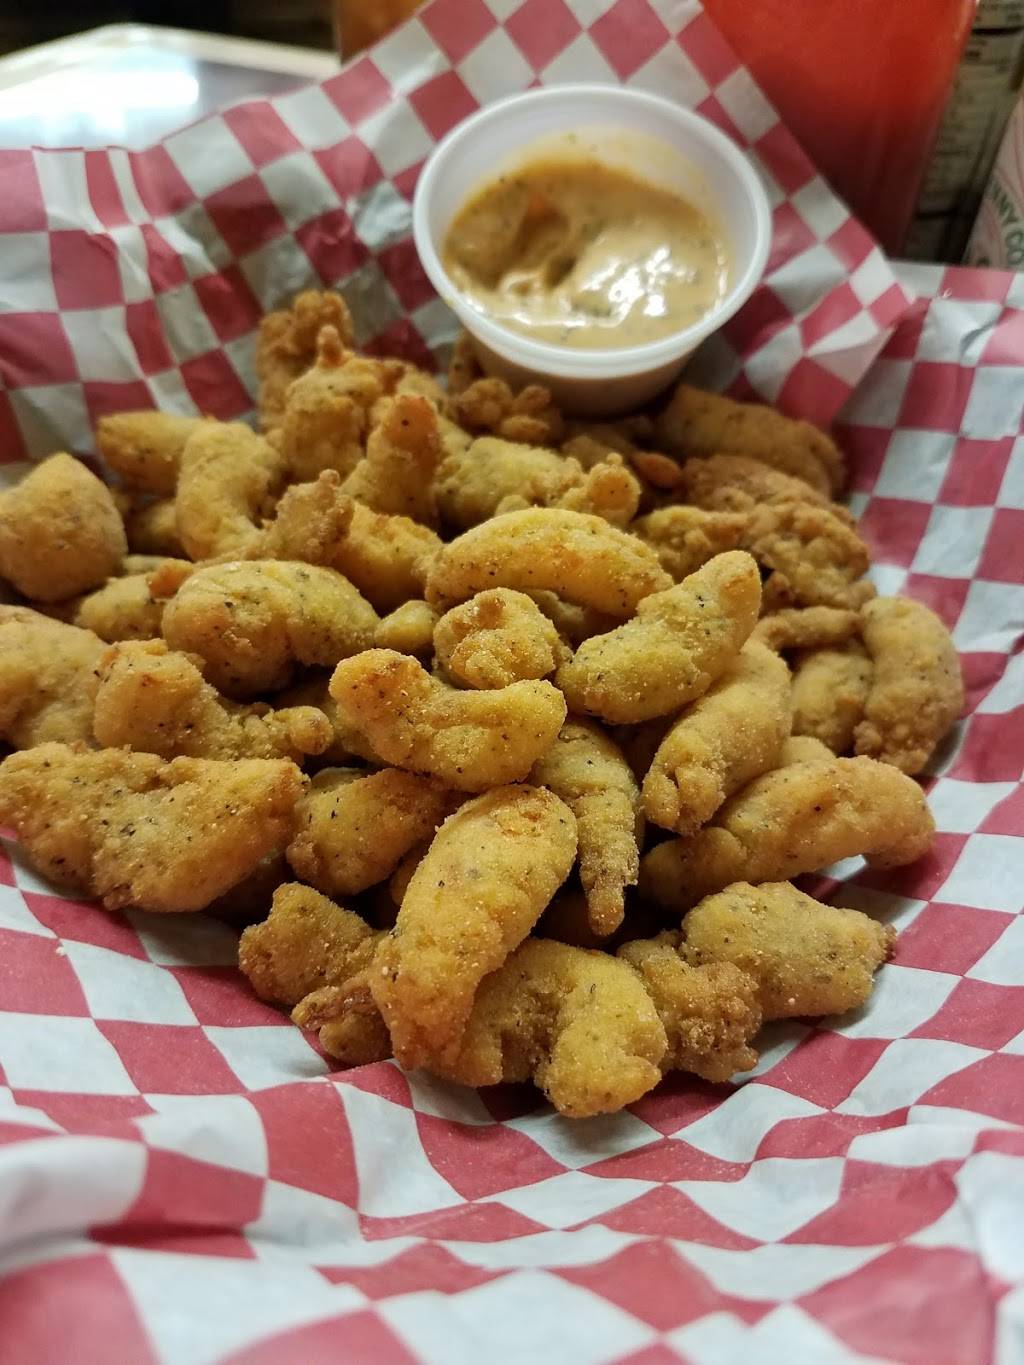 The Tackle Box - Catfish, Seafood, & Southern Home Cooking | restaurant | 2700 US-259 BUS, Kilgore, TX 75662, USA | 9032185401 OR +1 903-218-5401